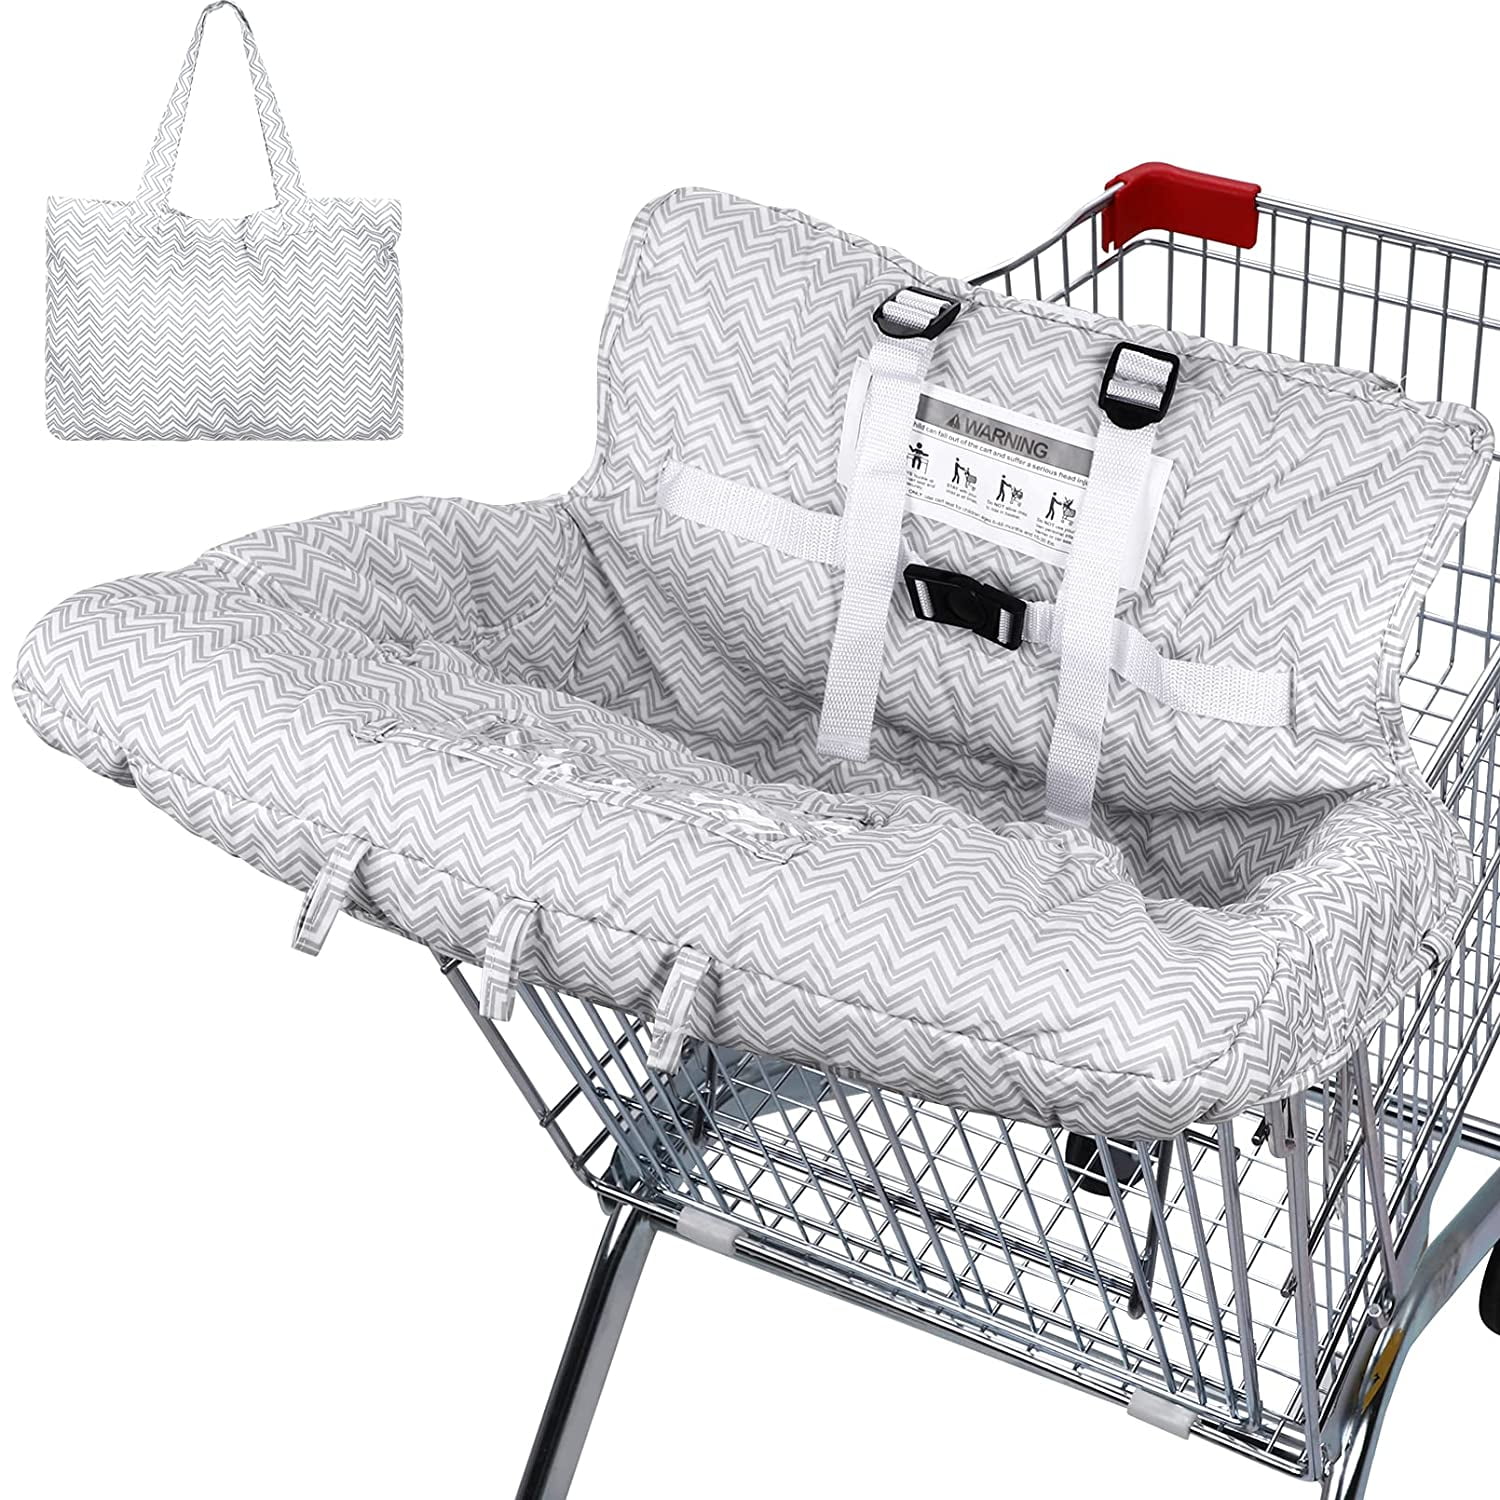 Baby Grocery Cart Cover High Chair Cushion Jeep 2-in-1 Shopping Cart Cover High Chair Cover Essentials Pocket Universal Size Cart Cover Safety Harness Toddler Infant High Chair Cover 